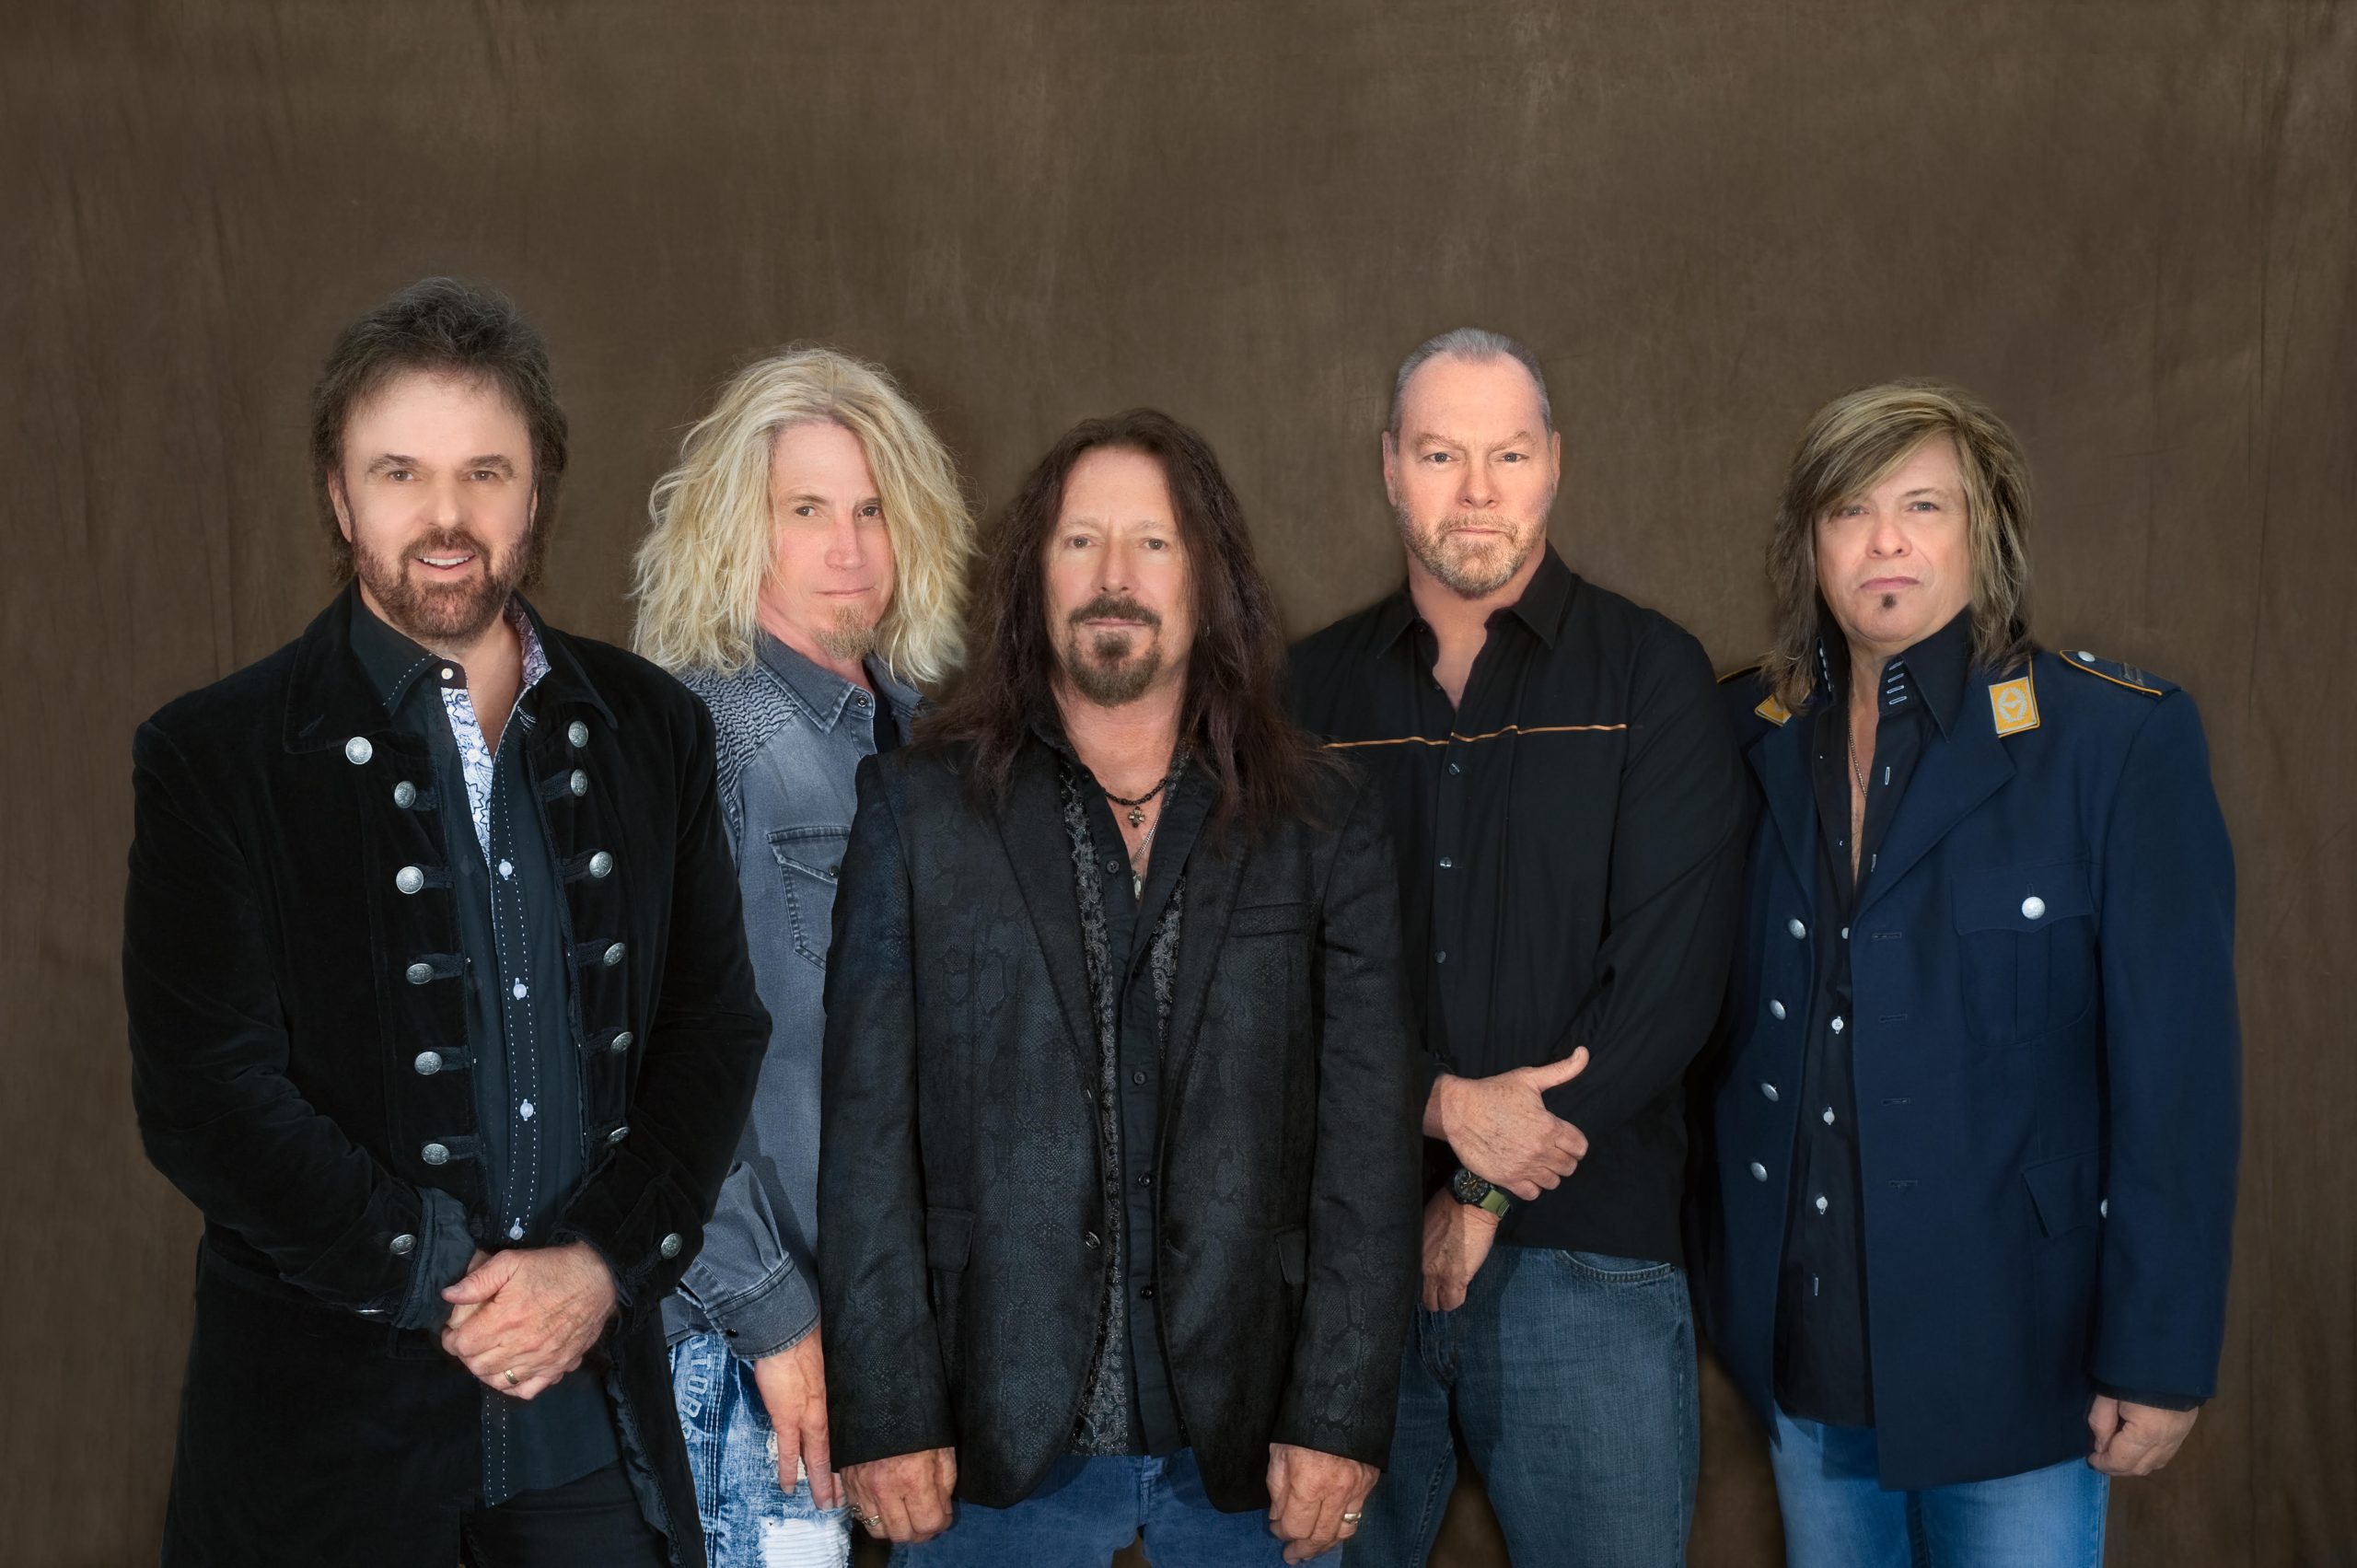 Southern rockers 38 Special to perform Nov. 22